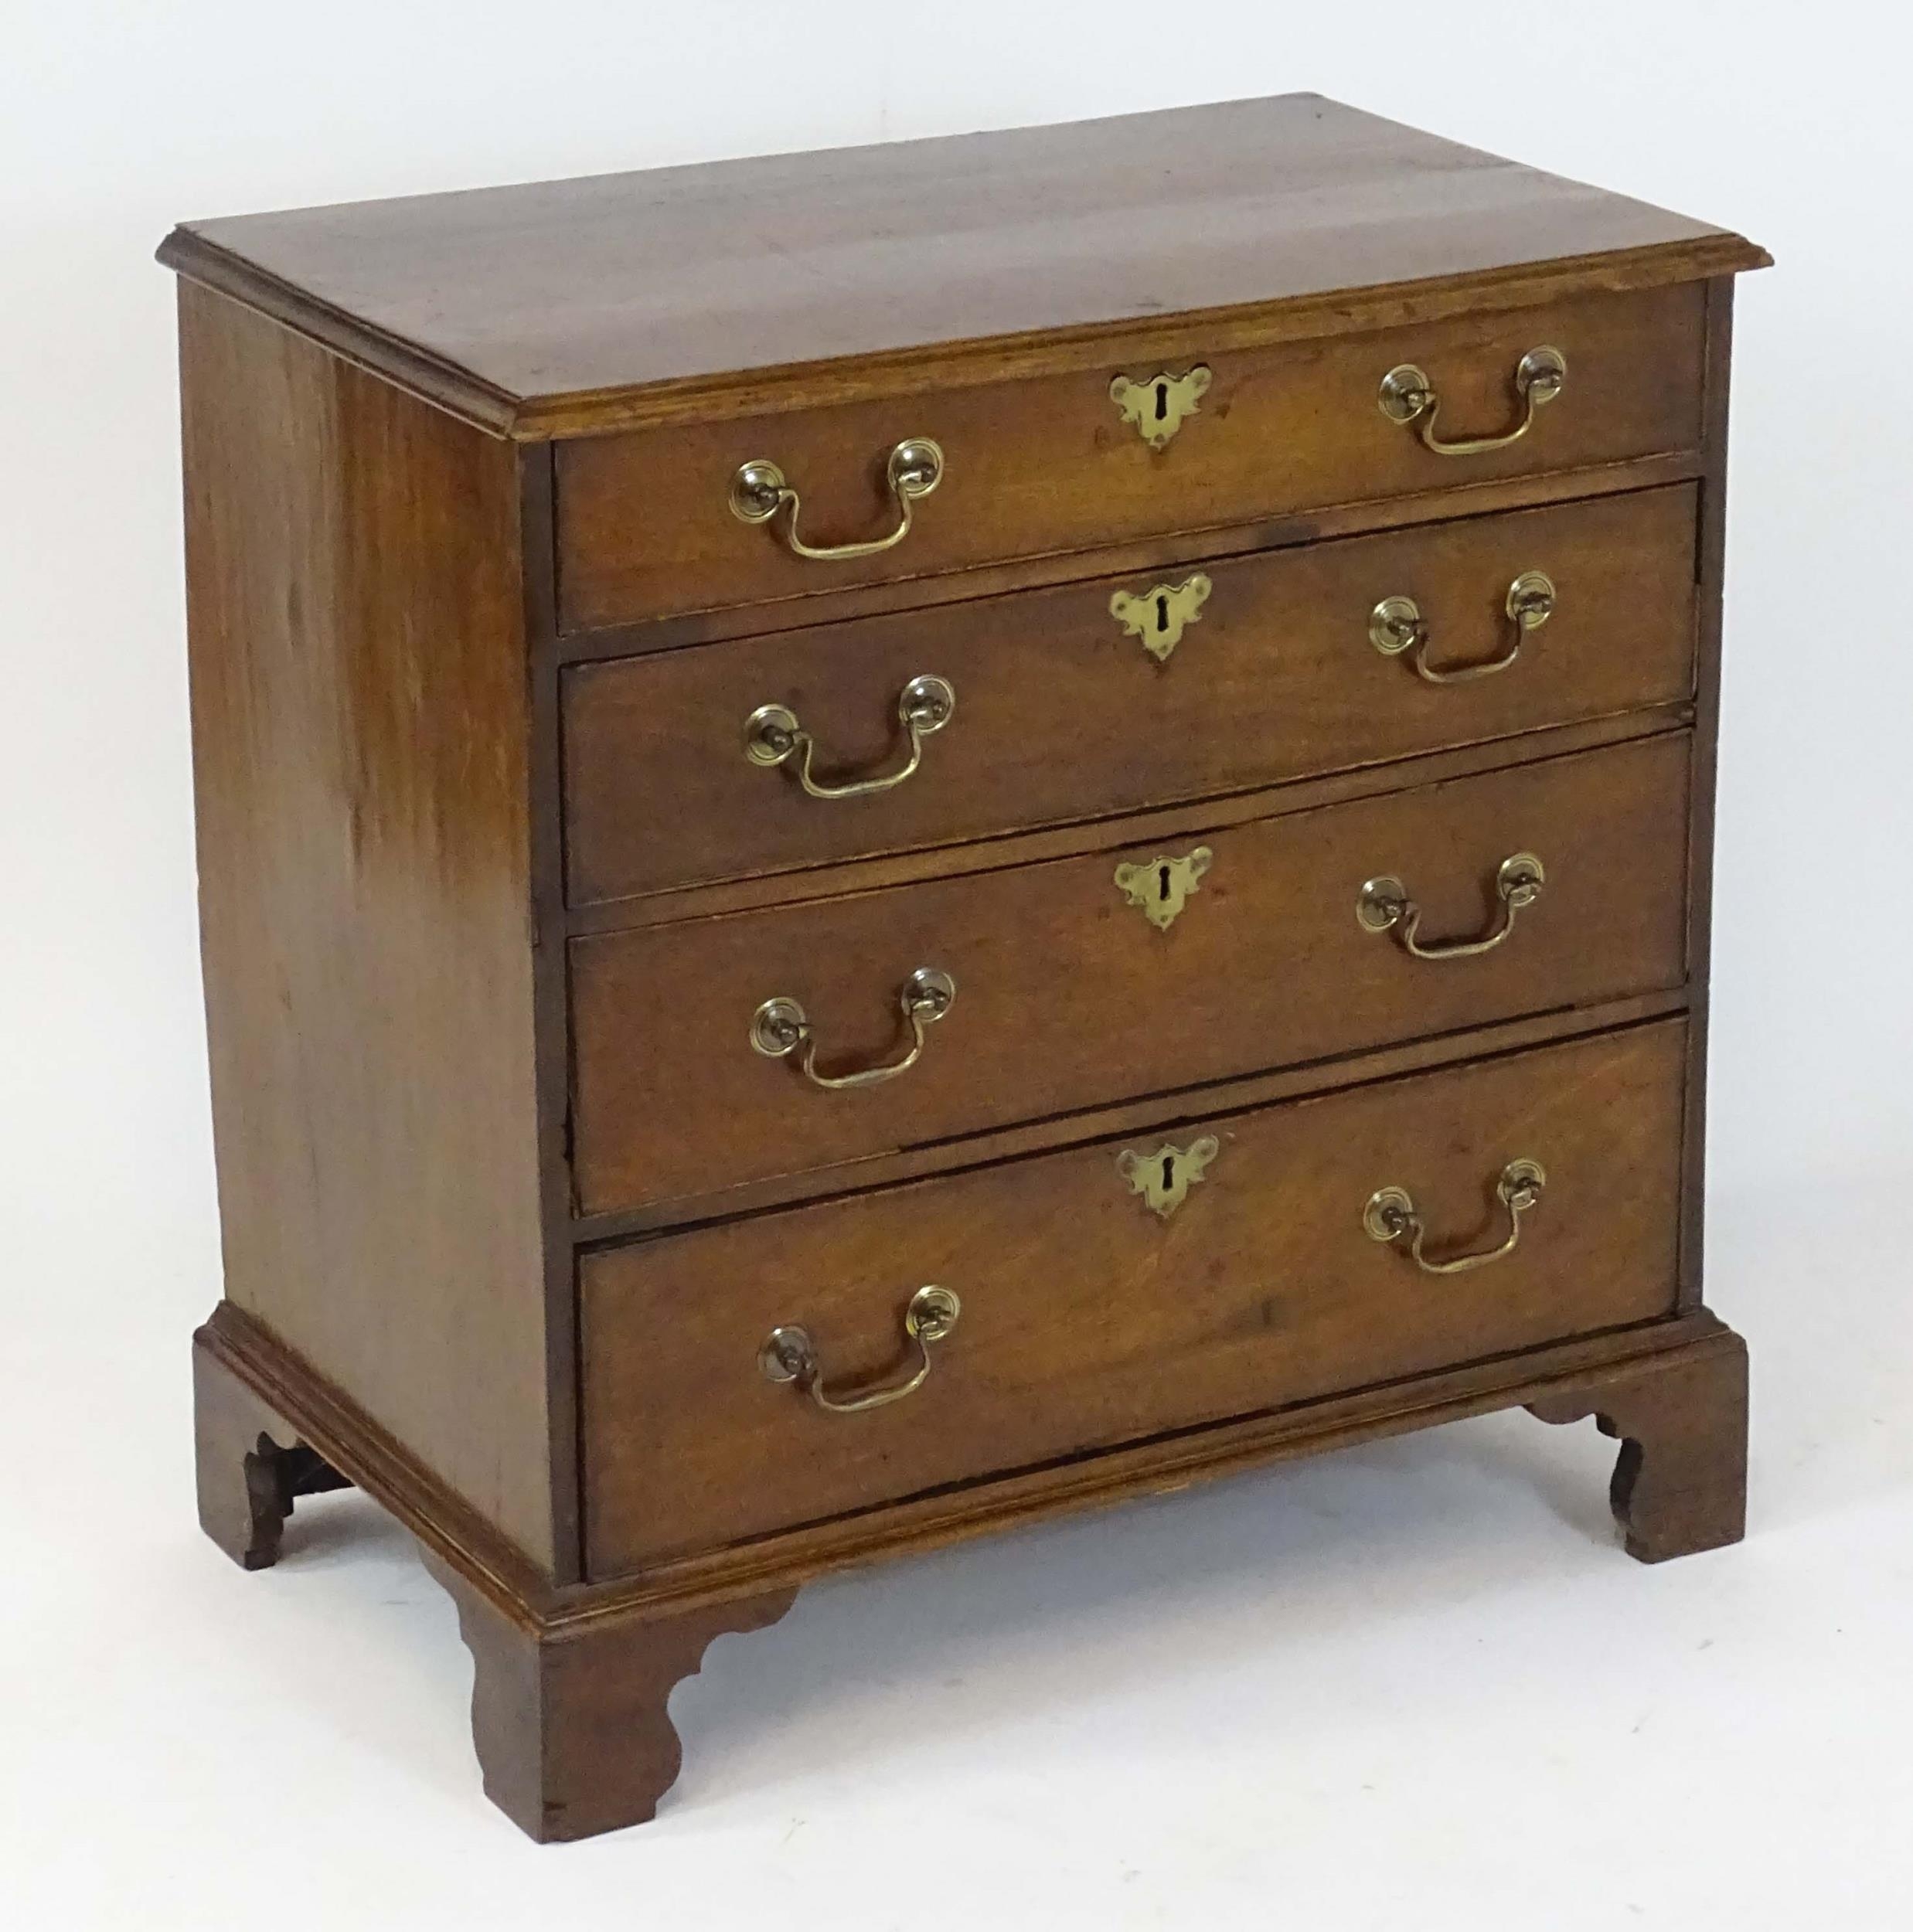 A Georgian mahogany chest of drawers with a moulded top above four long drawers with swan neck